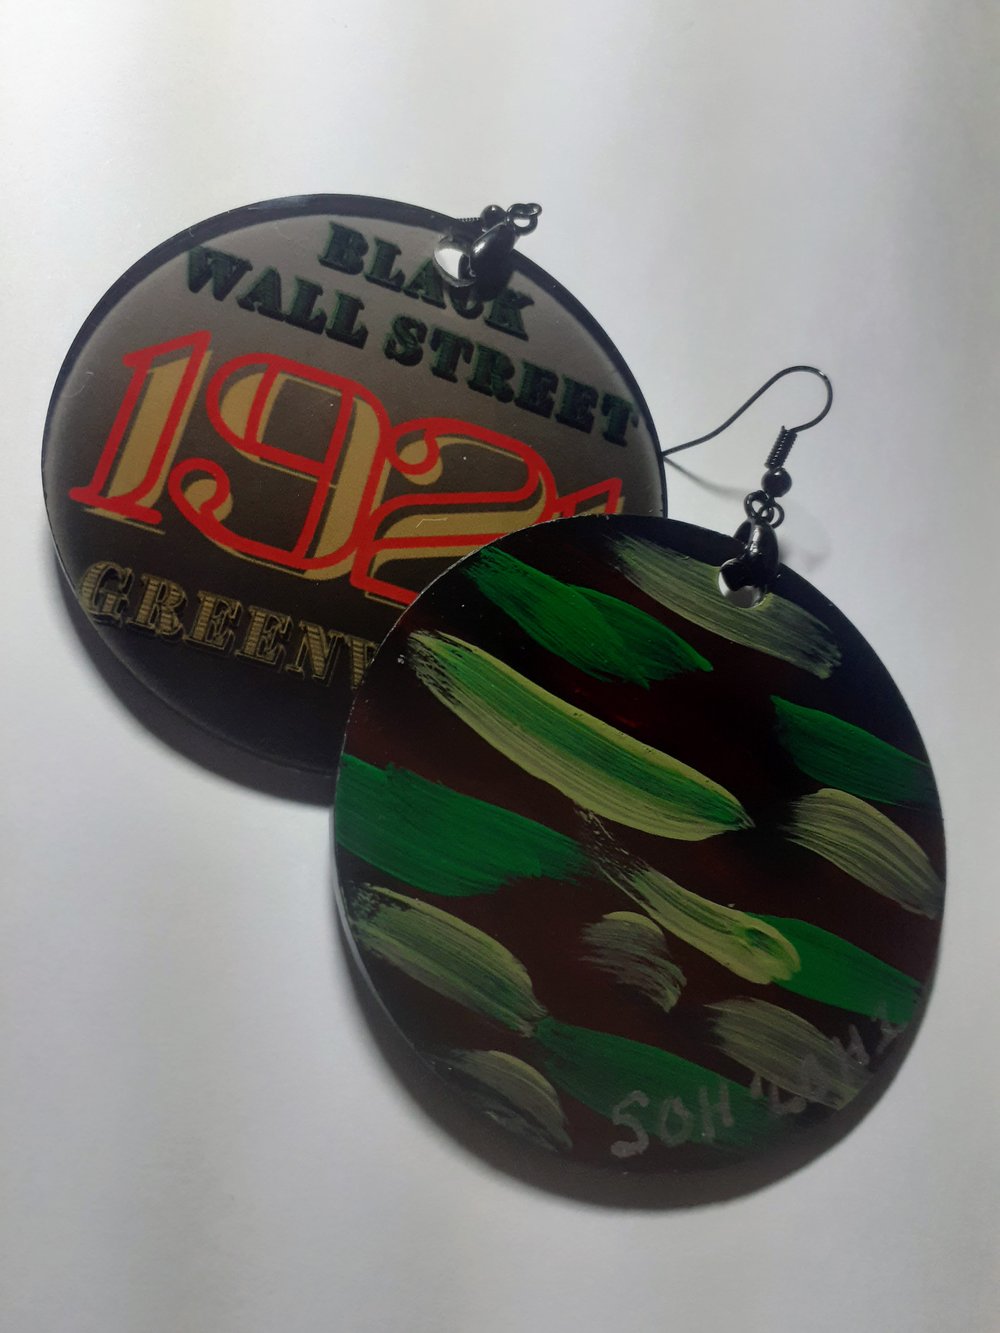 Image of Black Wall Street Custom Afrocentric Sublimation earrings